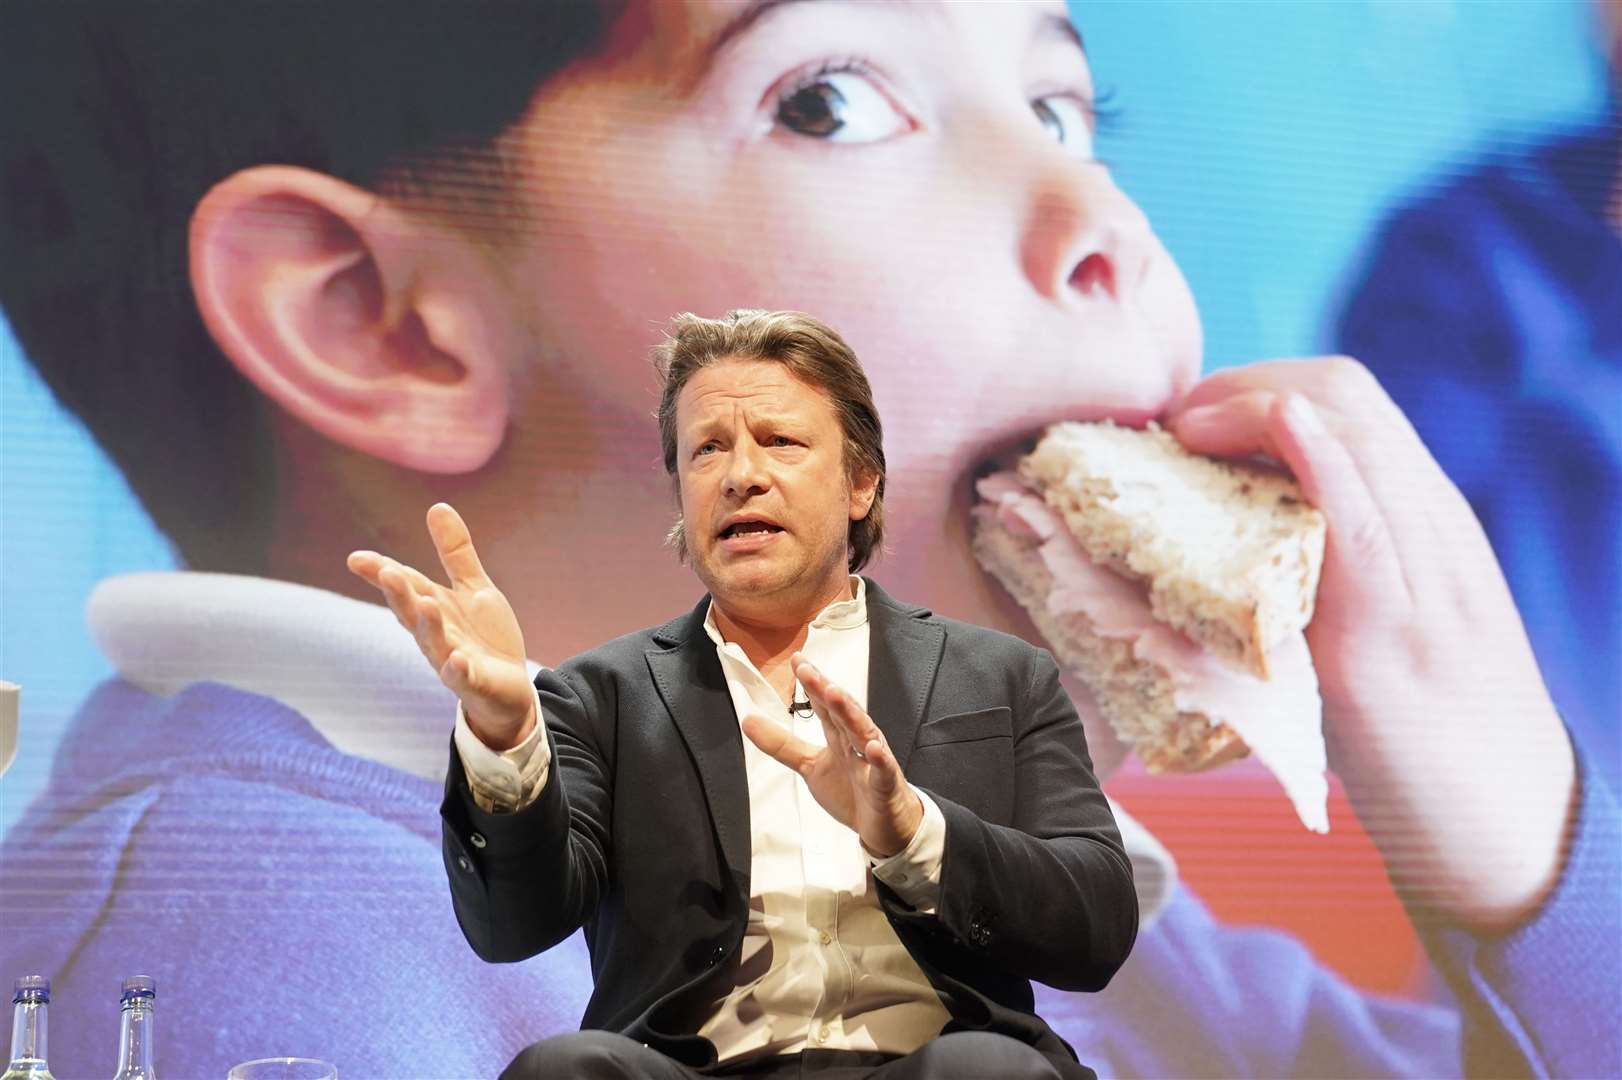 Jamie Oliver collaborated with The King’s Foundation charity on the scheme (Stefan Rousseau/PA)